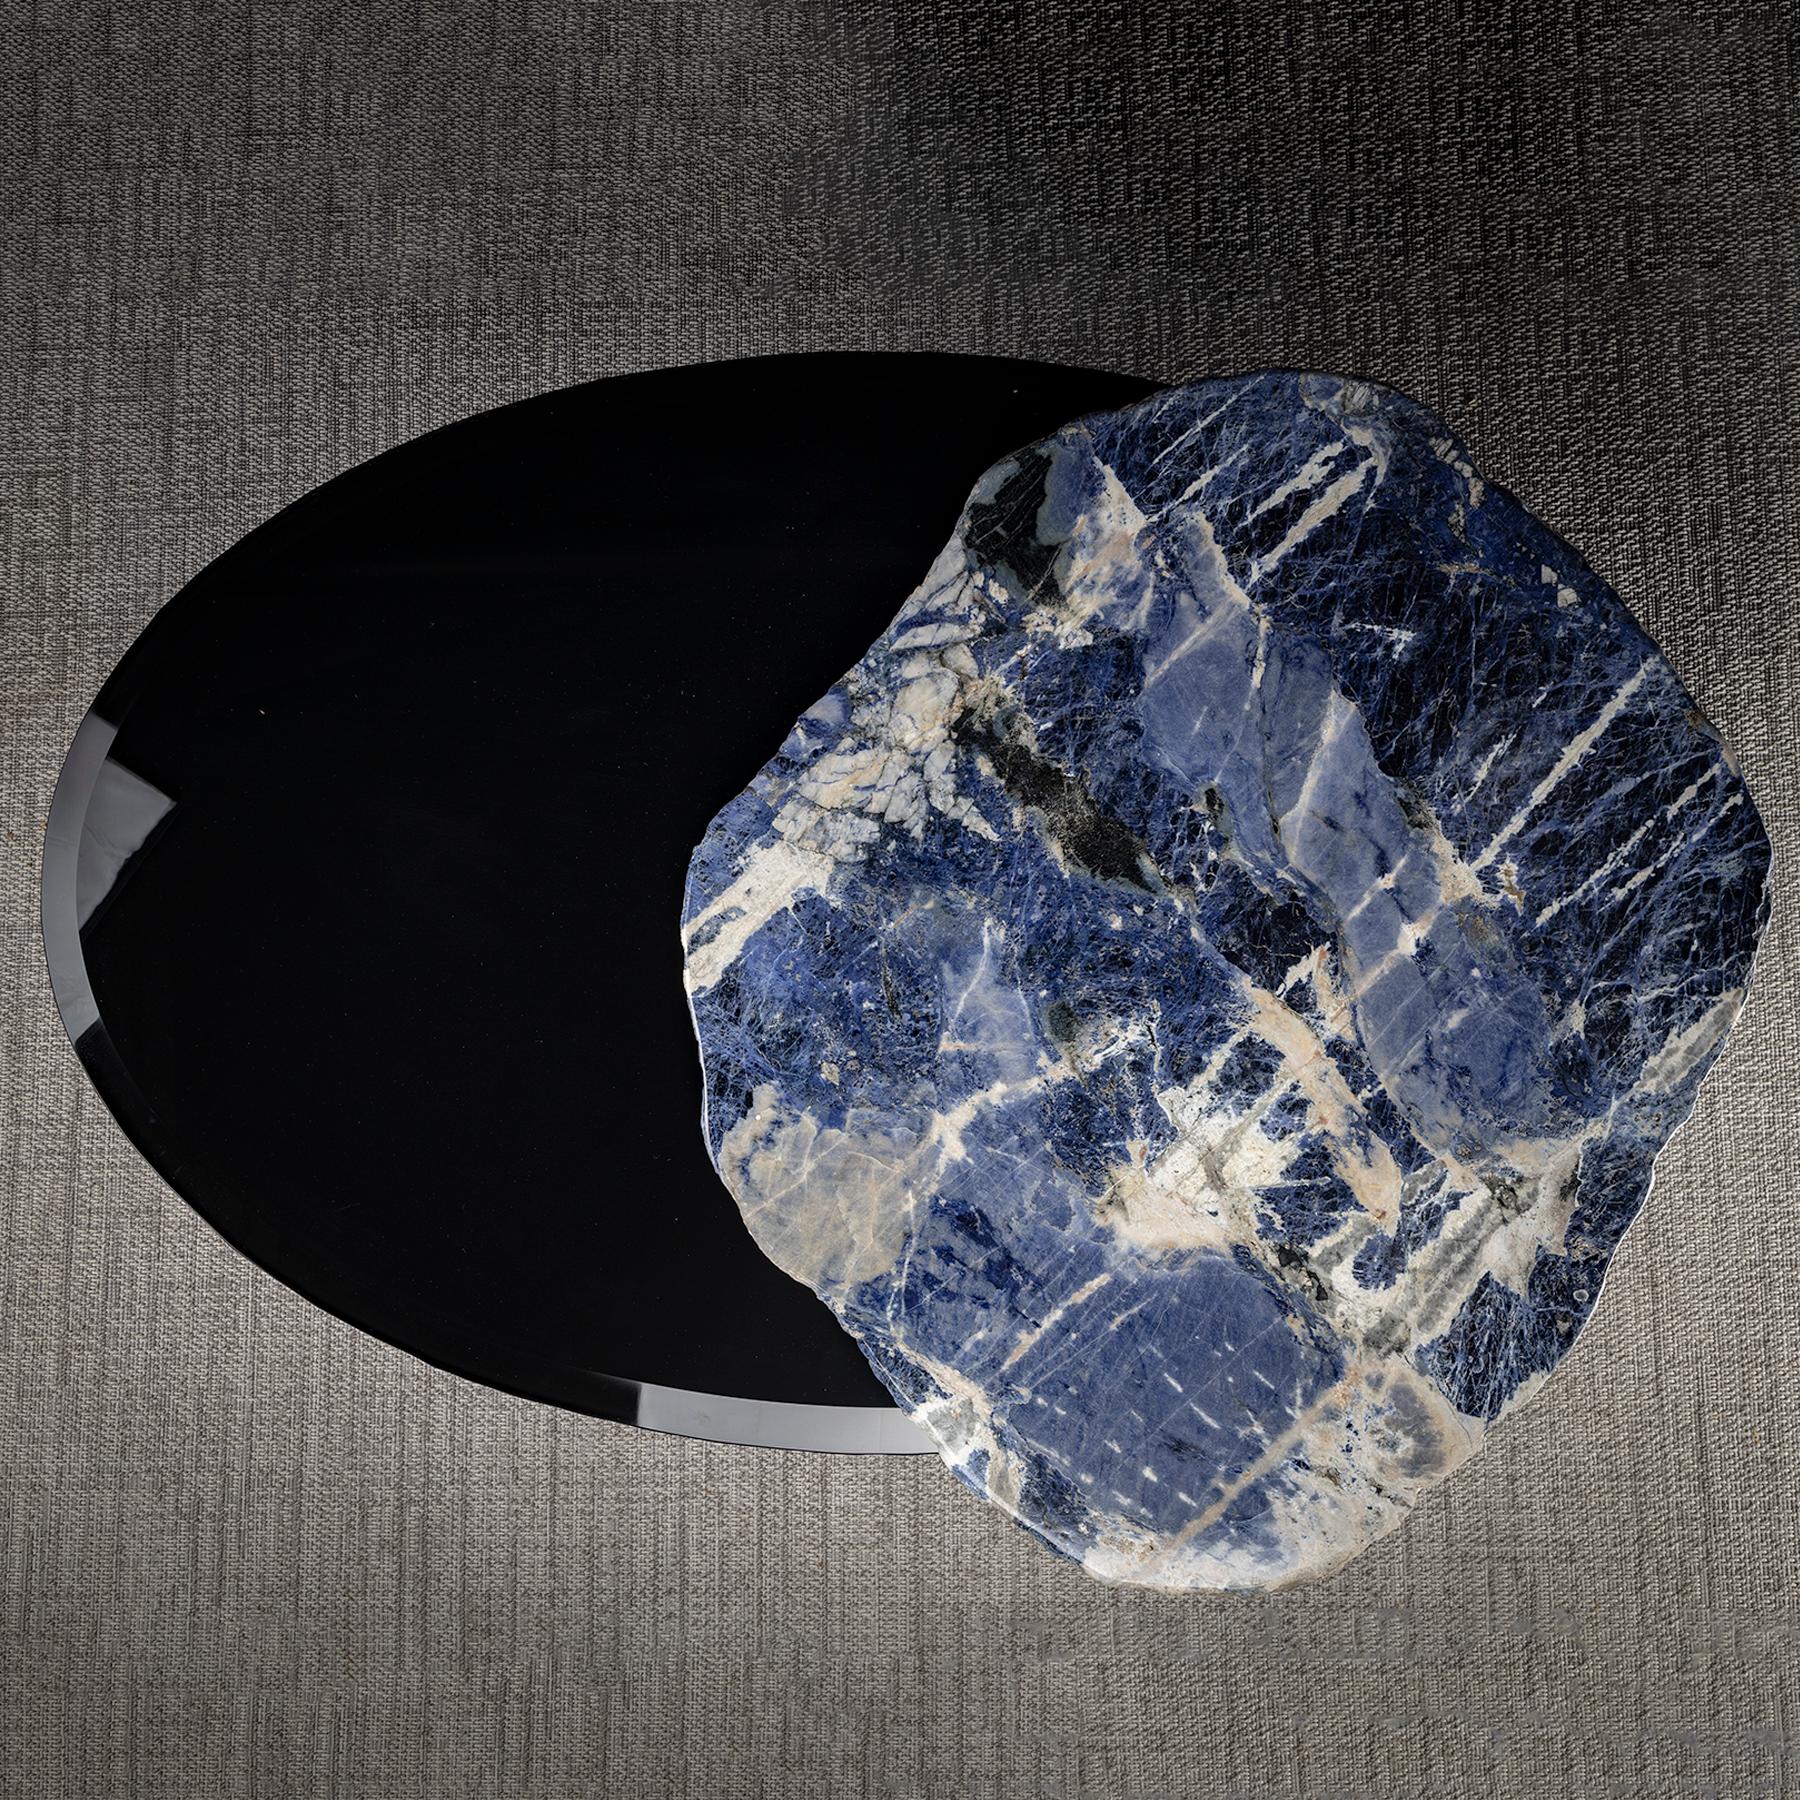 Mexican Center Table, with Rotating Brazilian Sodalite Slab on Black Tempered Glass